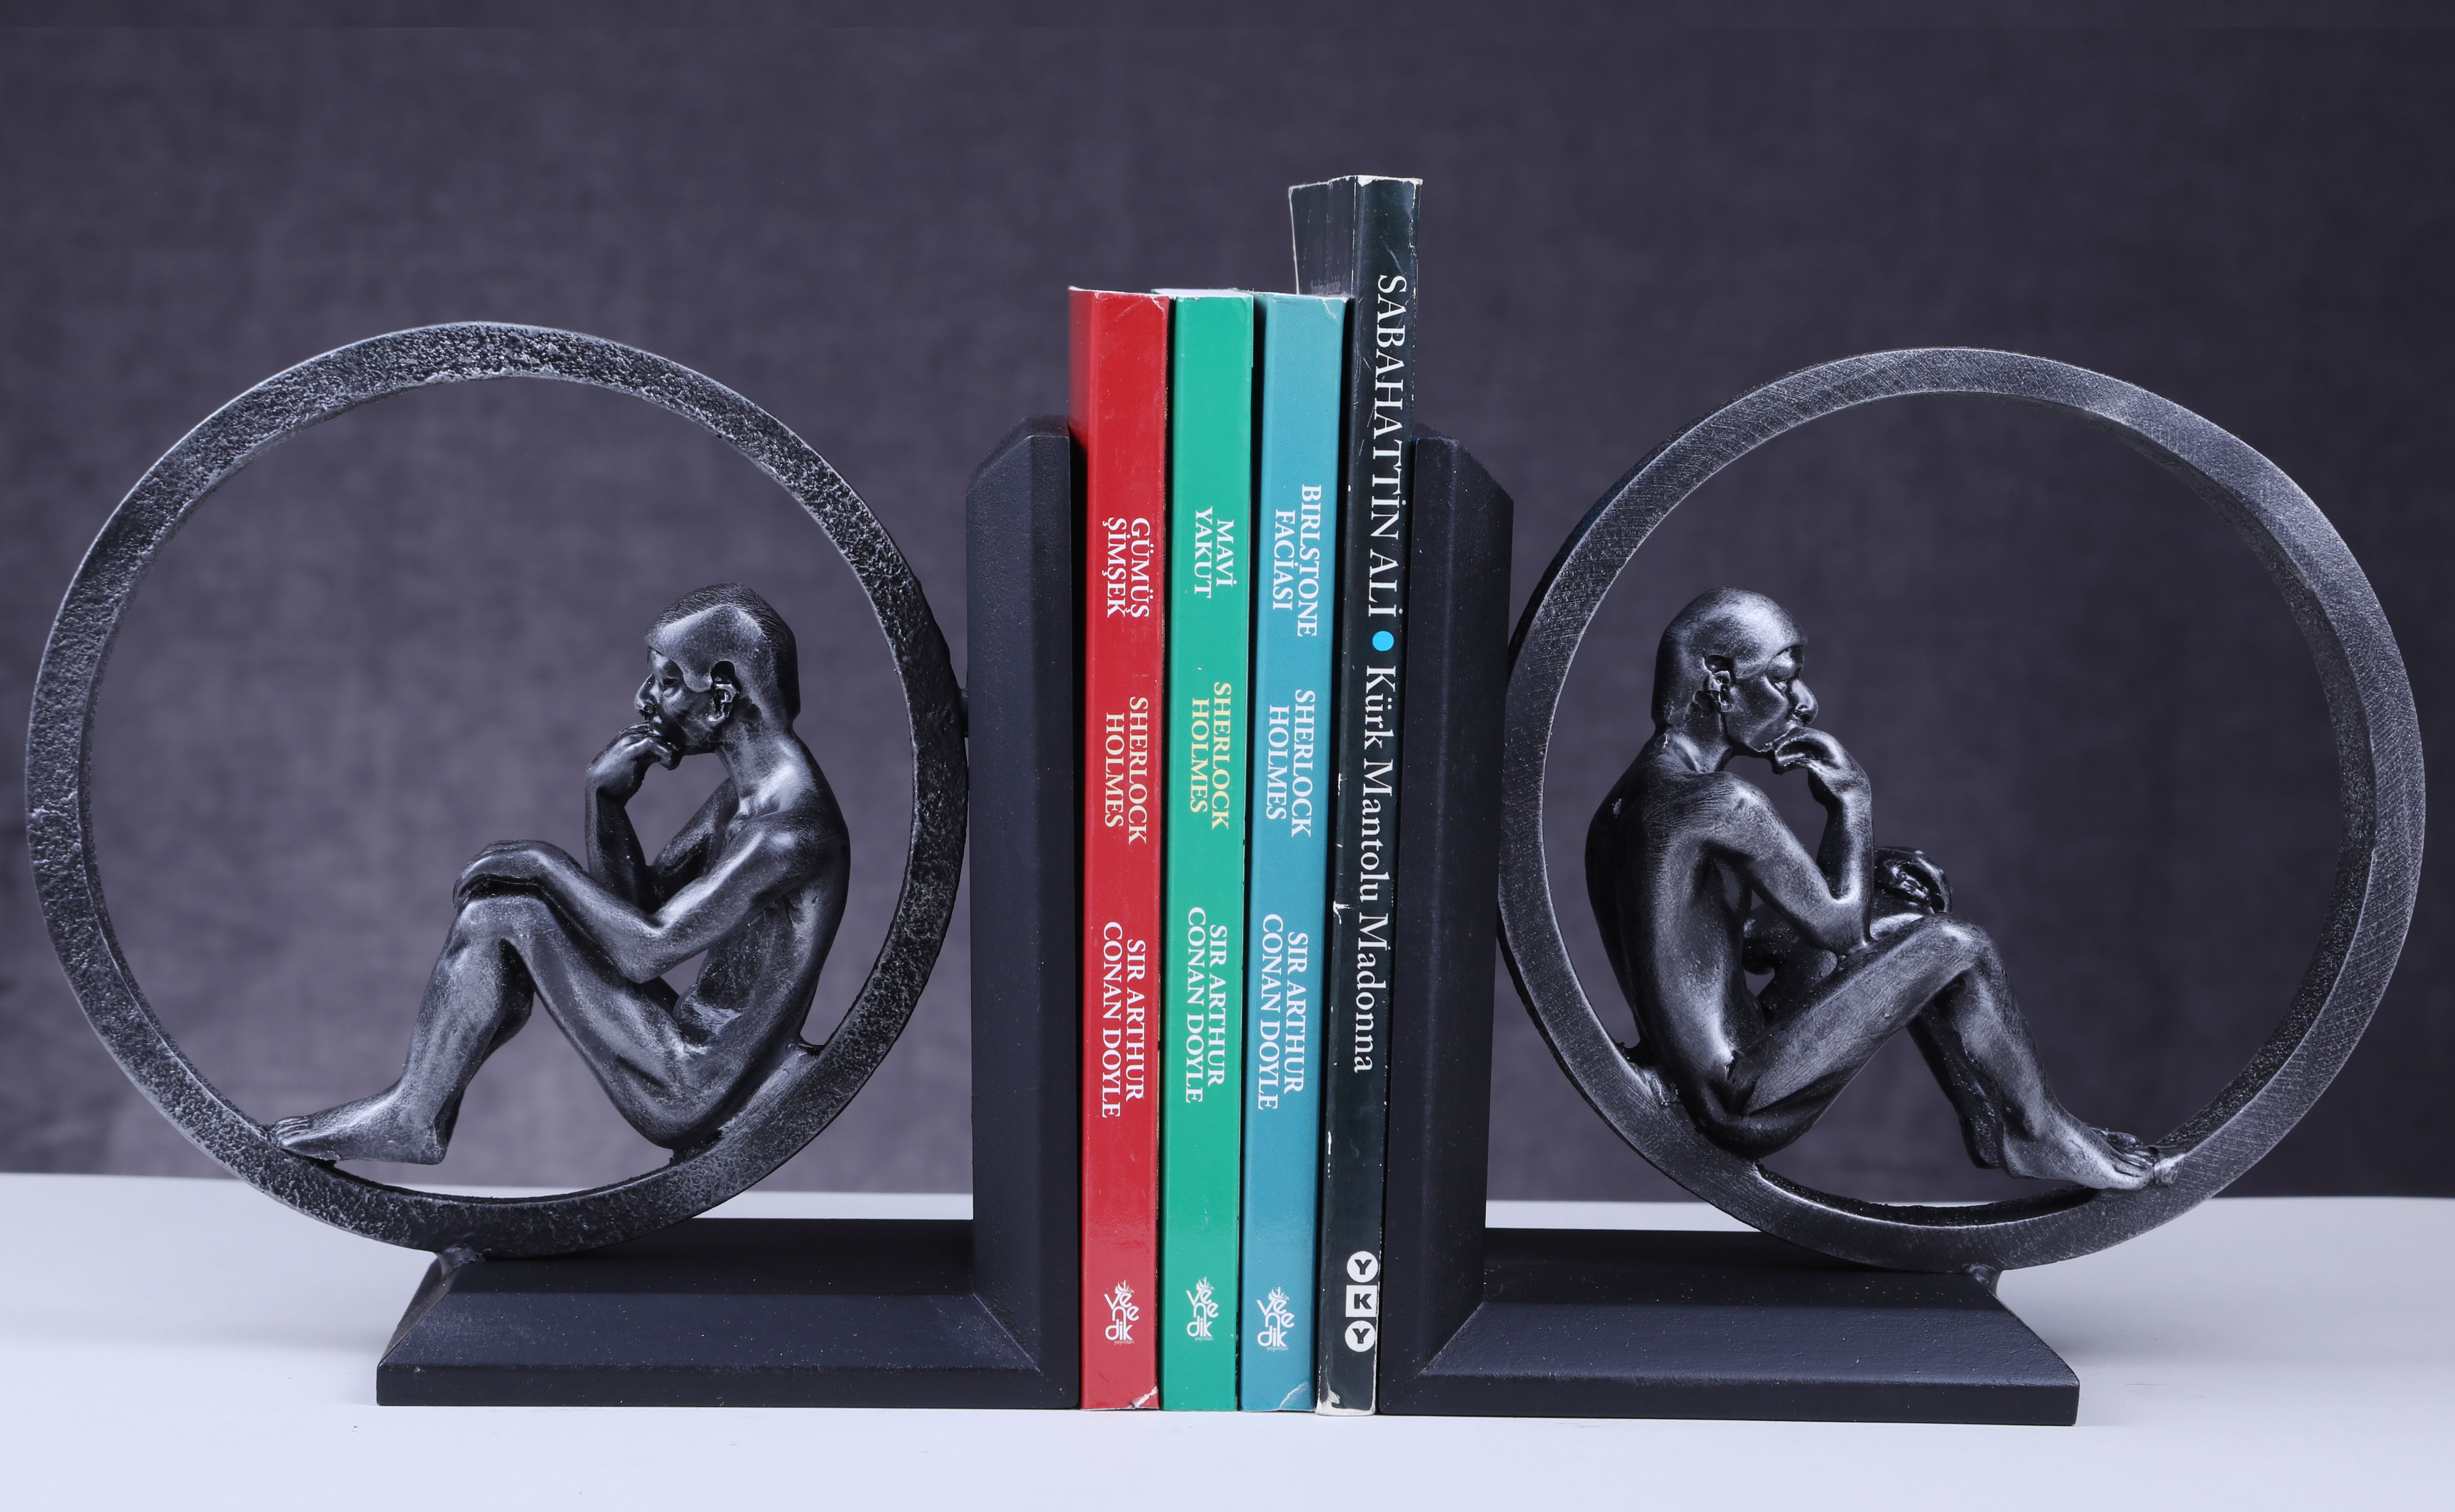 SPECIAL DESIGN BOOK HOLDER WITH THINKING HUMAN FIGURE IN RING